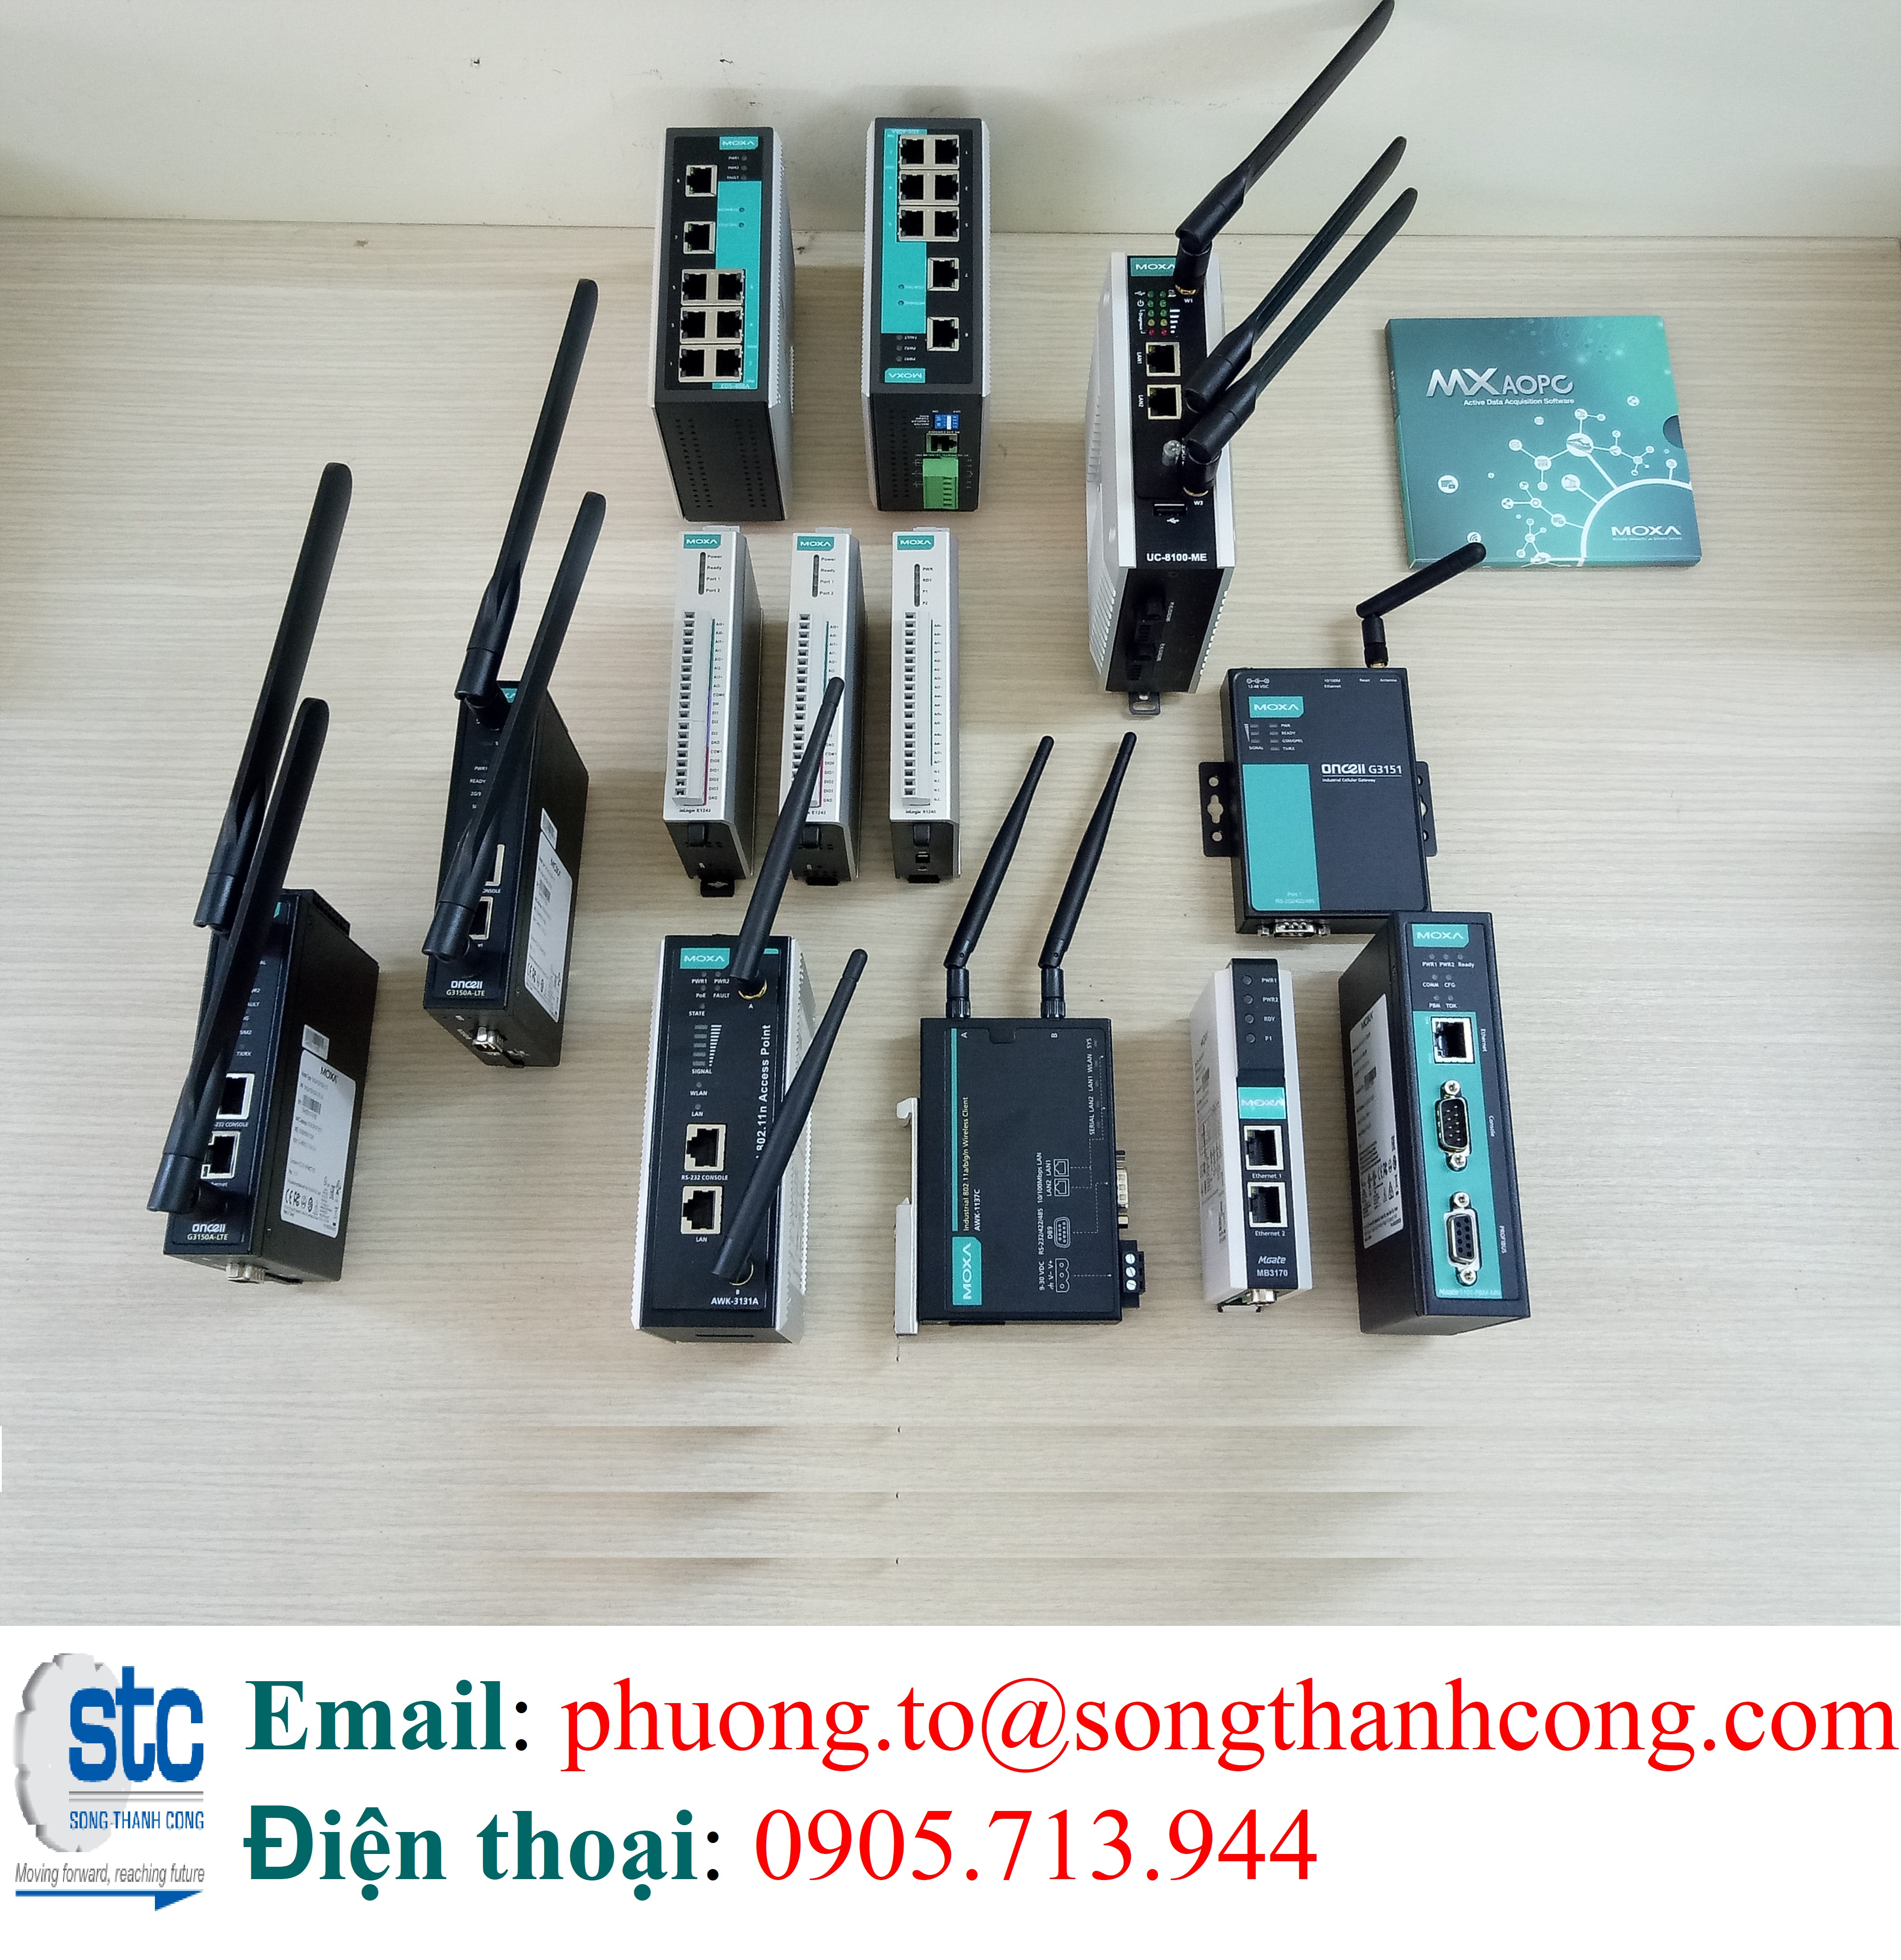 thiet-bi-mang-truyen-thong-trong-cong-nghiep-moxa-nport-5250a-song-thanh-cong-autho-stc-viet-nam-autho.png